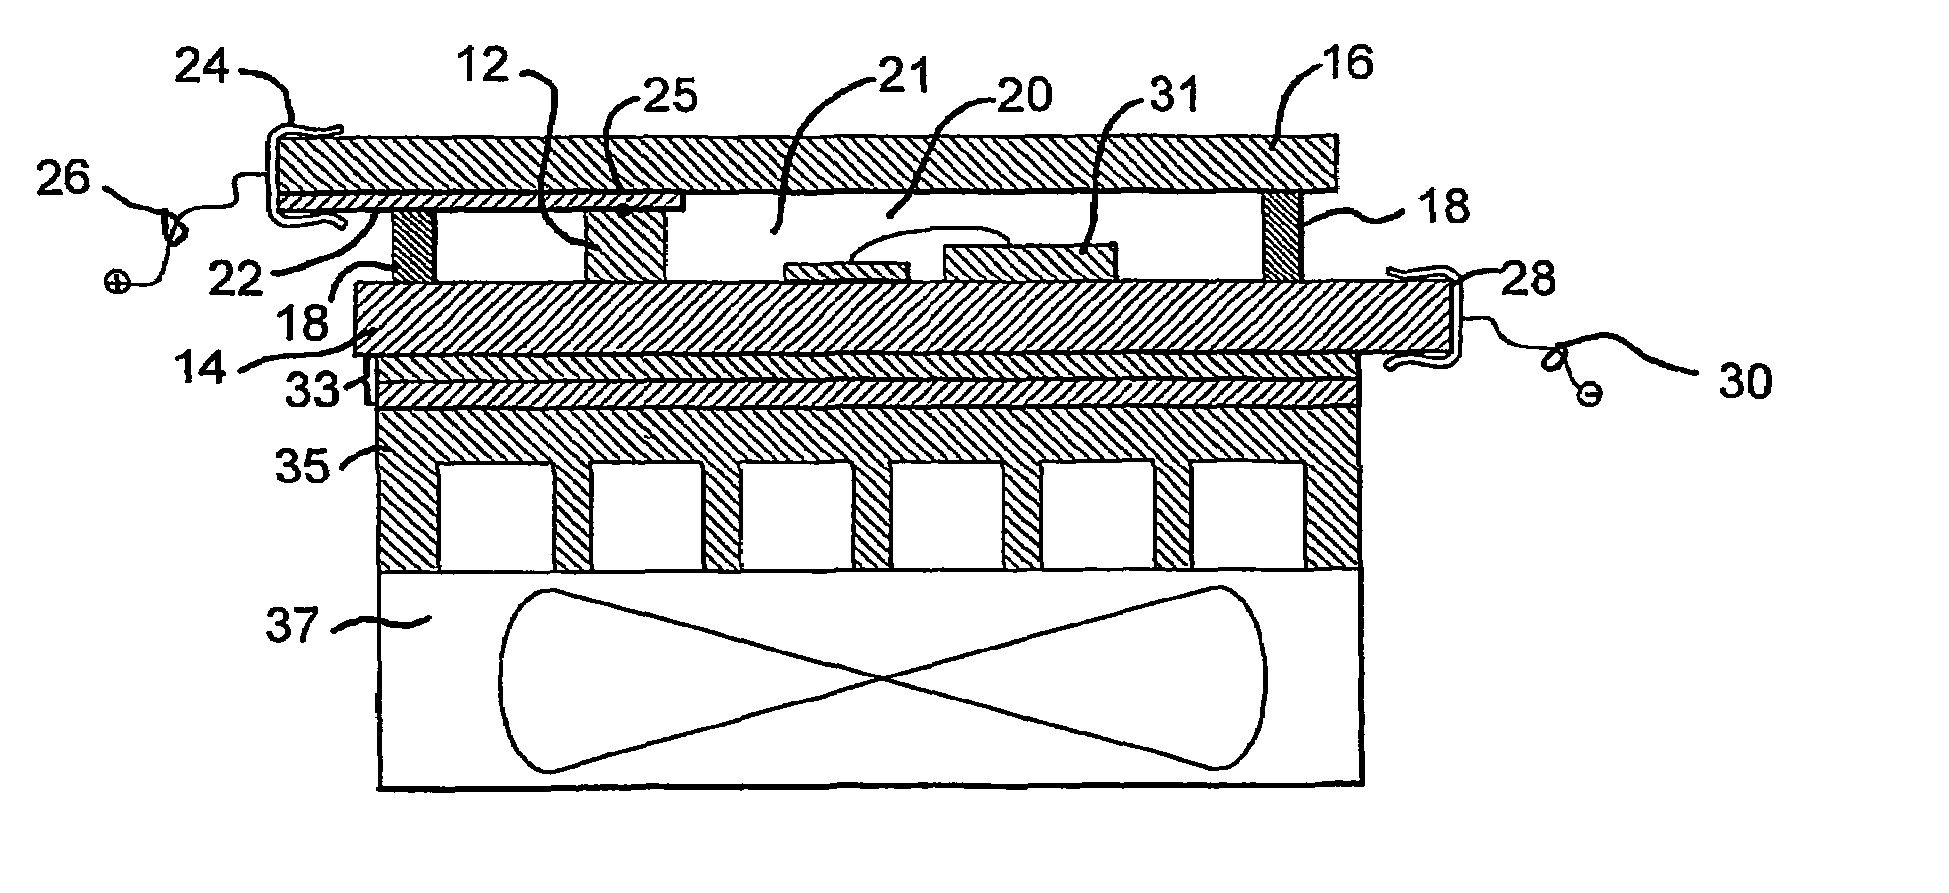 High power radiation emitter device and heat dissipating package for electronic components